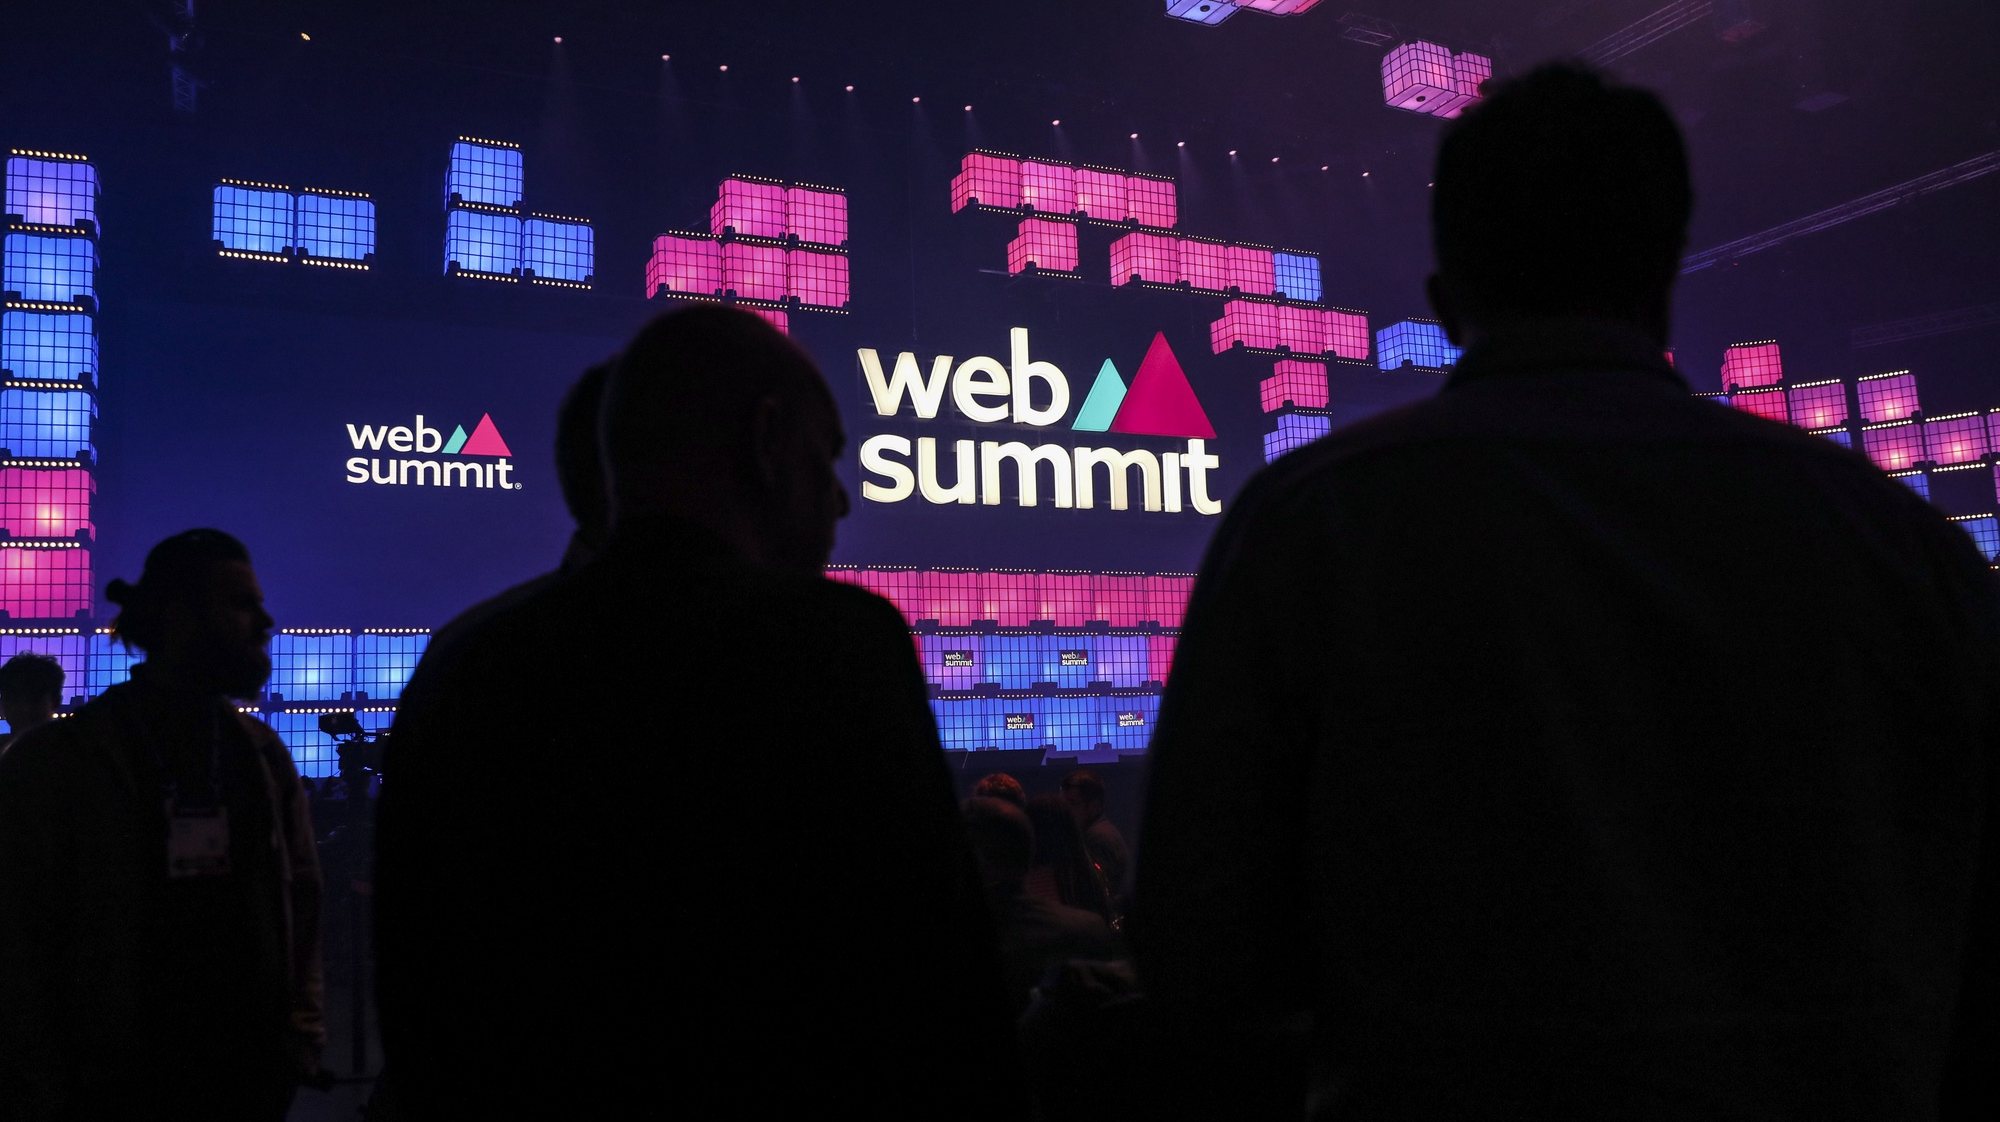 Web Summit 2022 Opening Night in Lisbon, Portugal, 01 November 2022. Web Summit is considered the largest event of startups and technological entrepreneur ship in the world, takes place from 1 to 4 of November in Lisbon. MIGUEL A. LOPES/LUSA